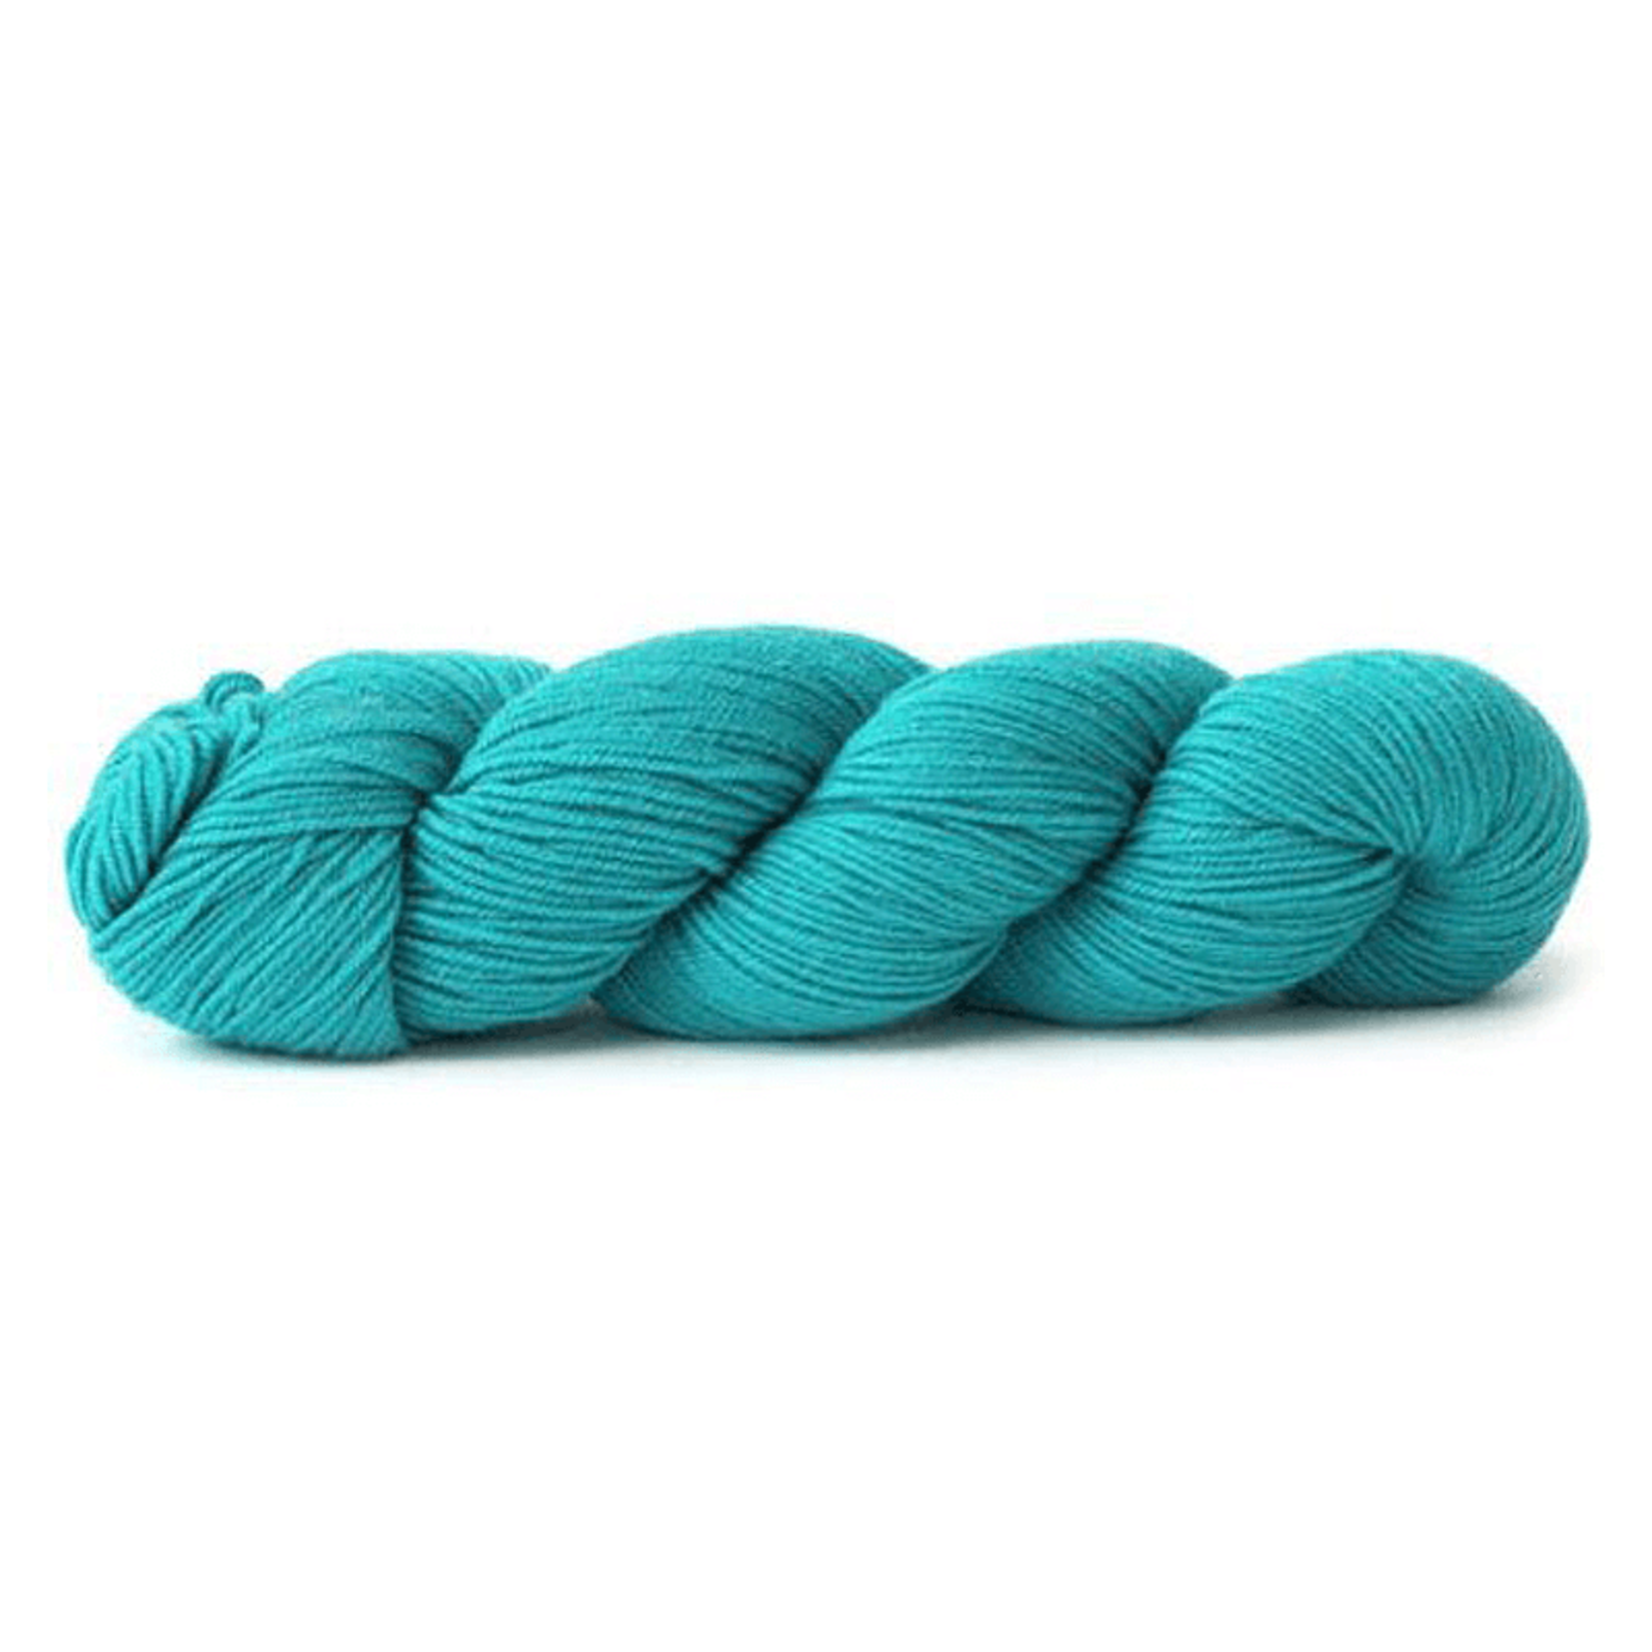 Skacel Collection Sueno Worsted, 1347, Turks